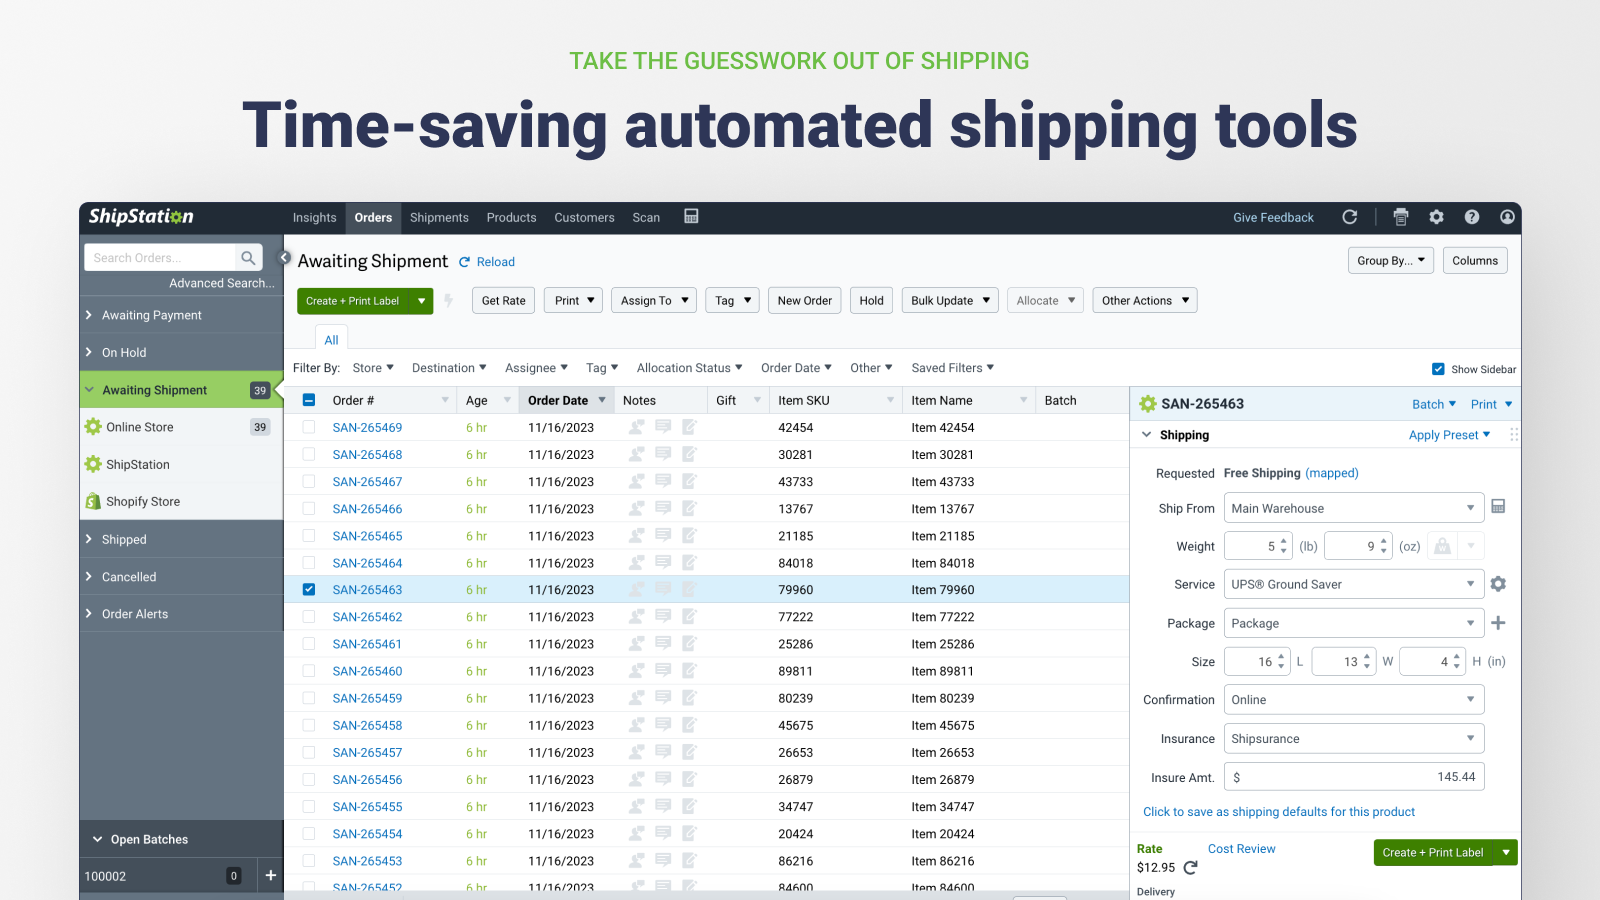 Save time and money by automating order management & fulfillment